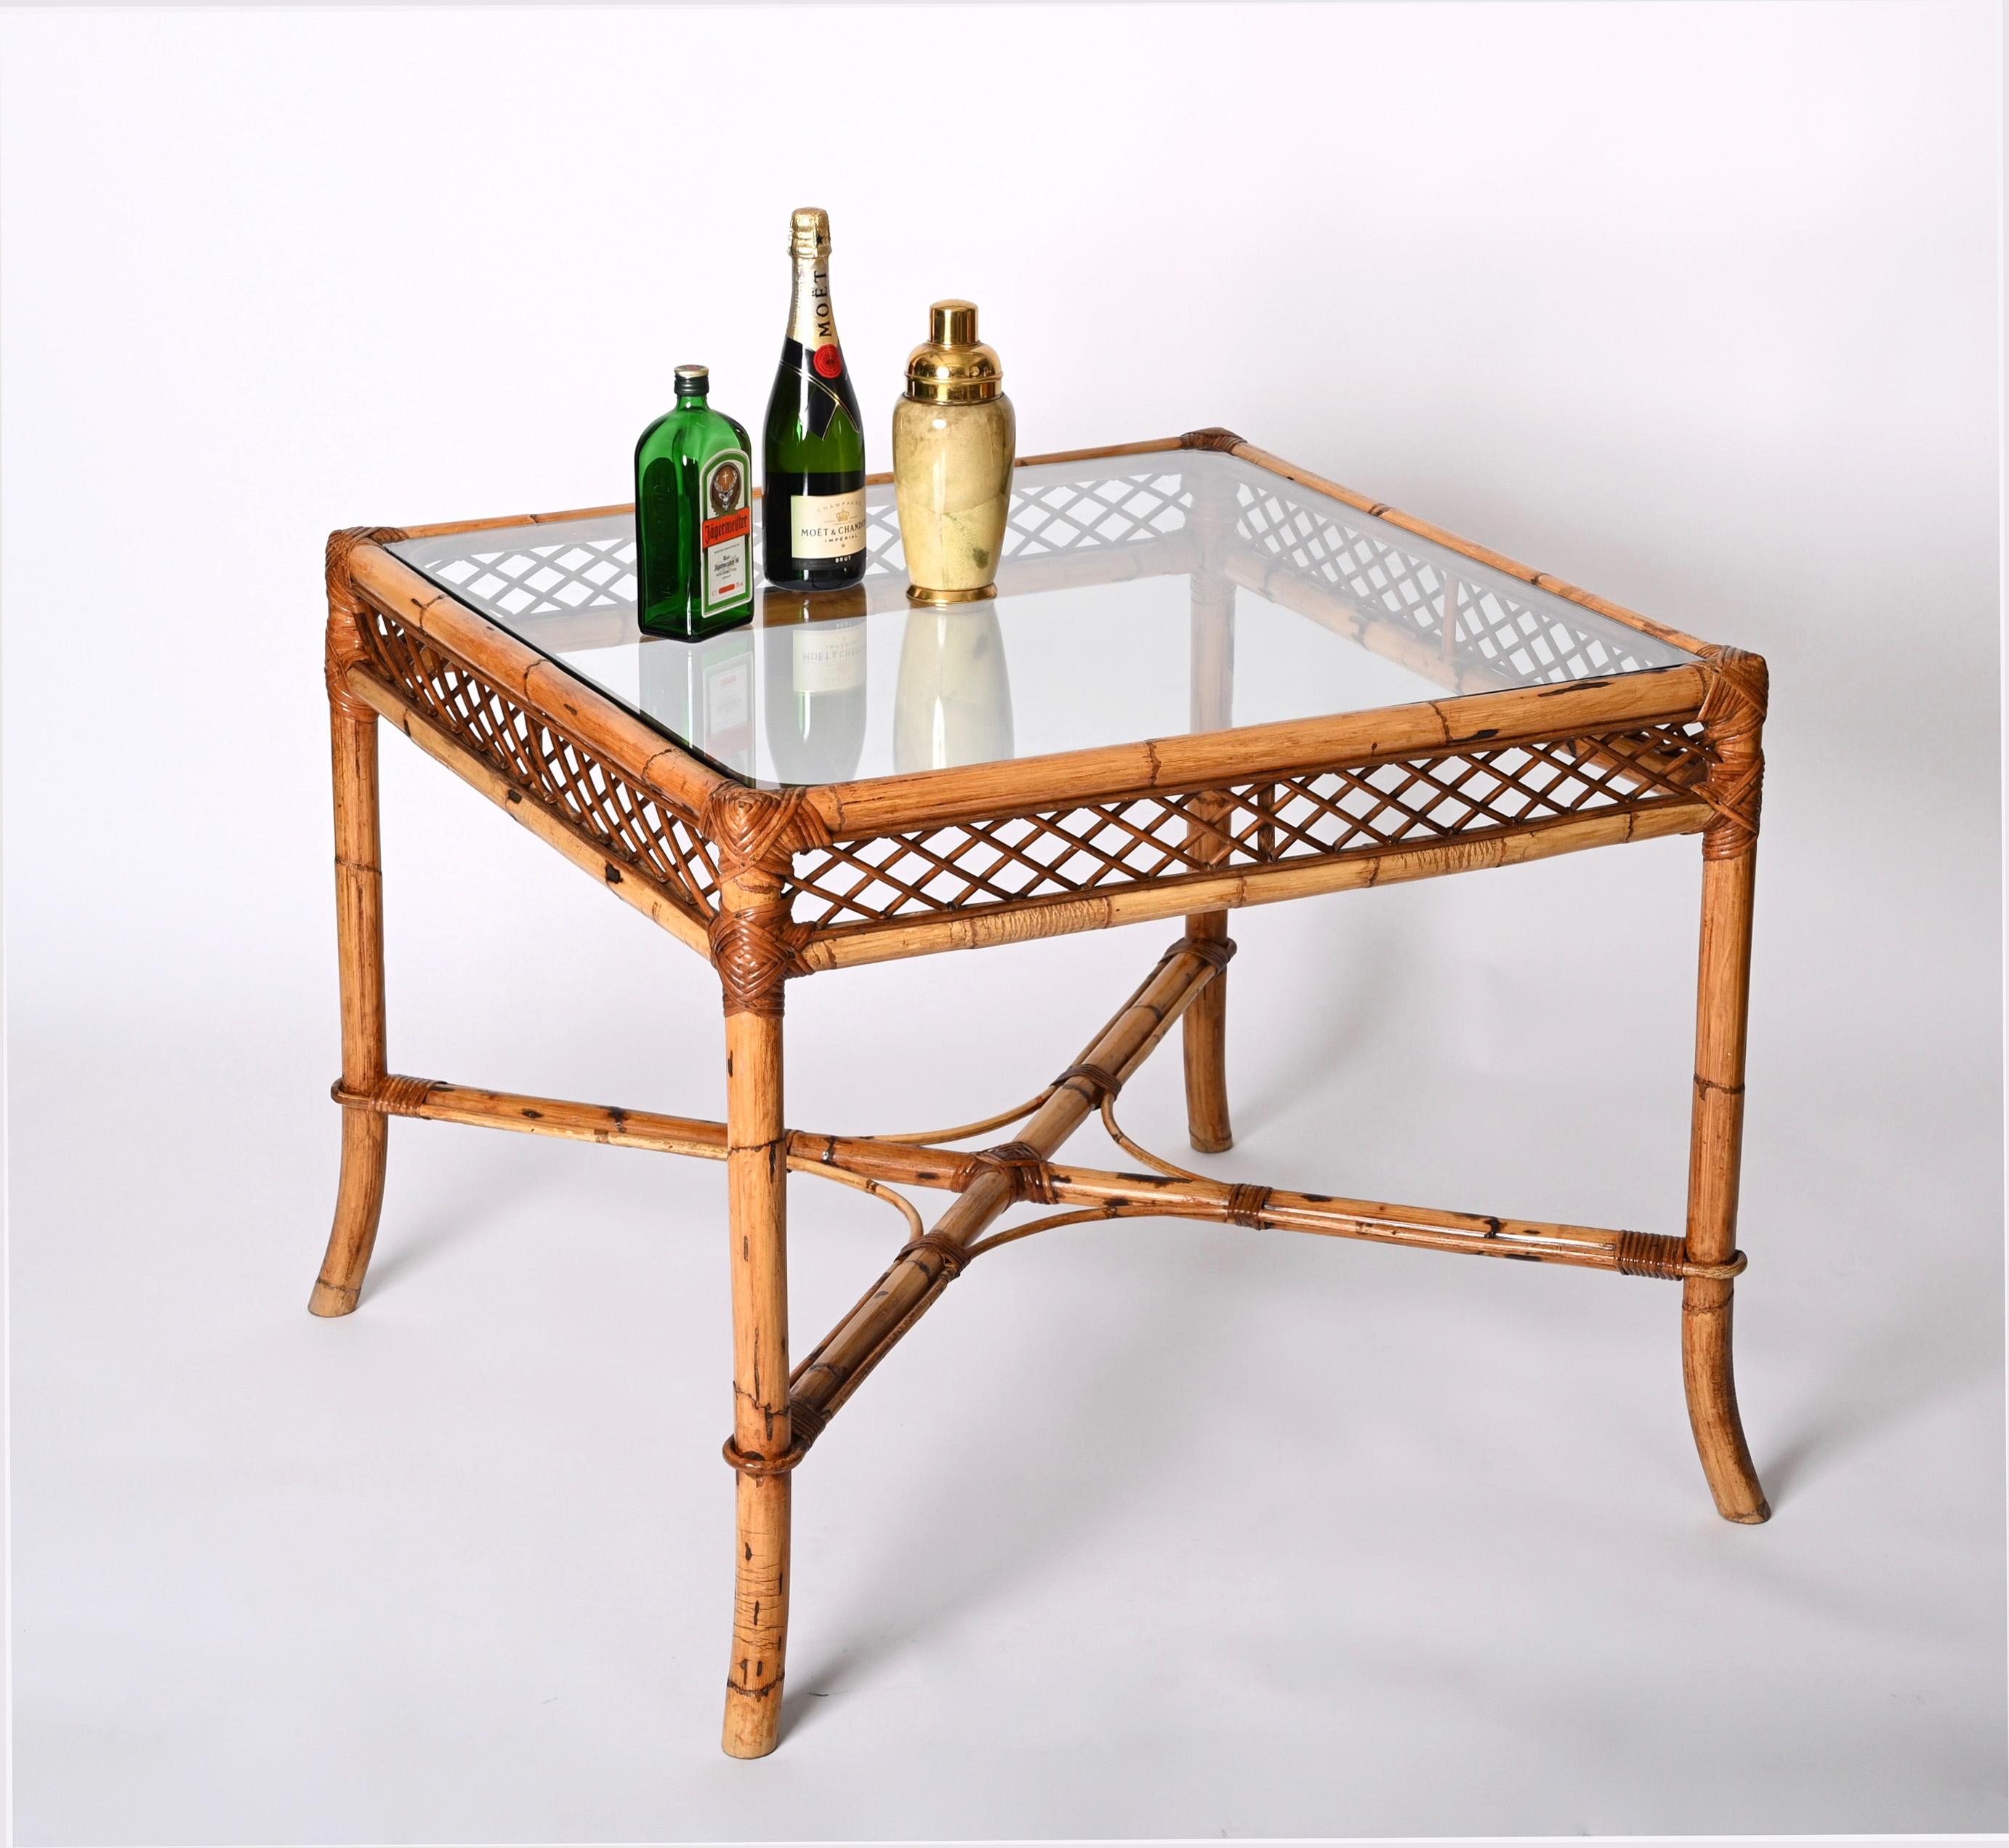 Midcentury Vivai del Sud Squared Bamboo Italian Dining Table with Glass Top 1960 For Sale 12